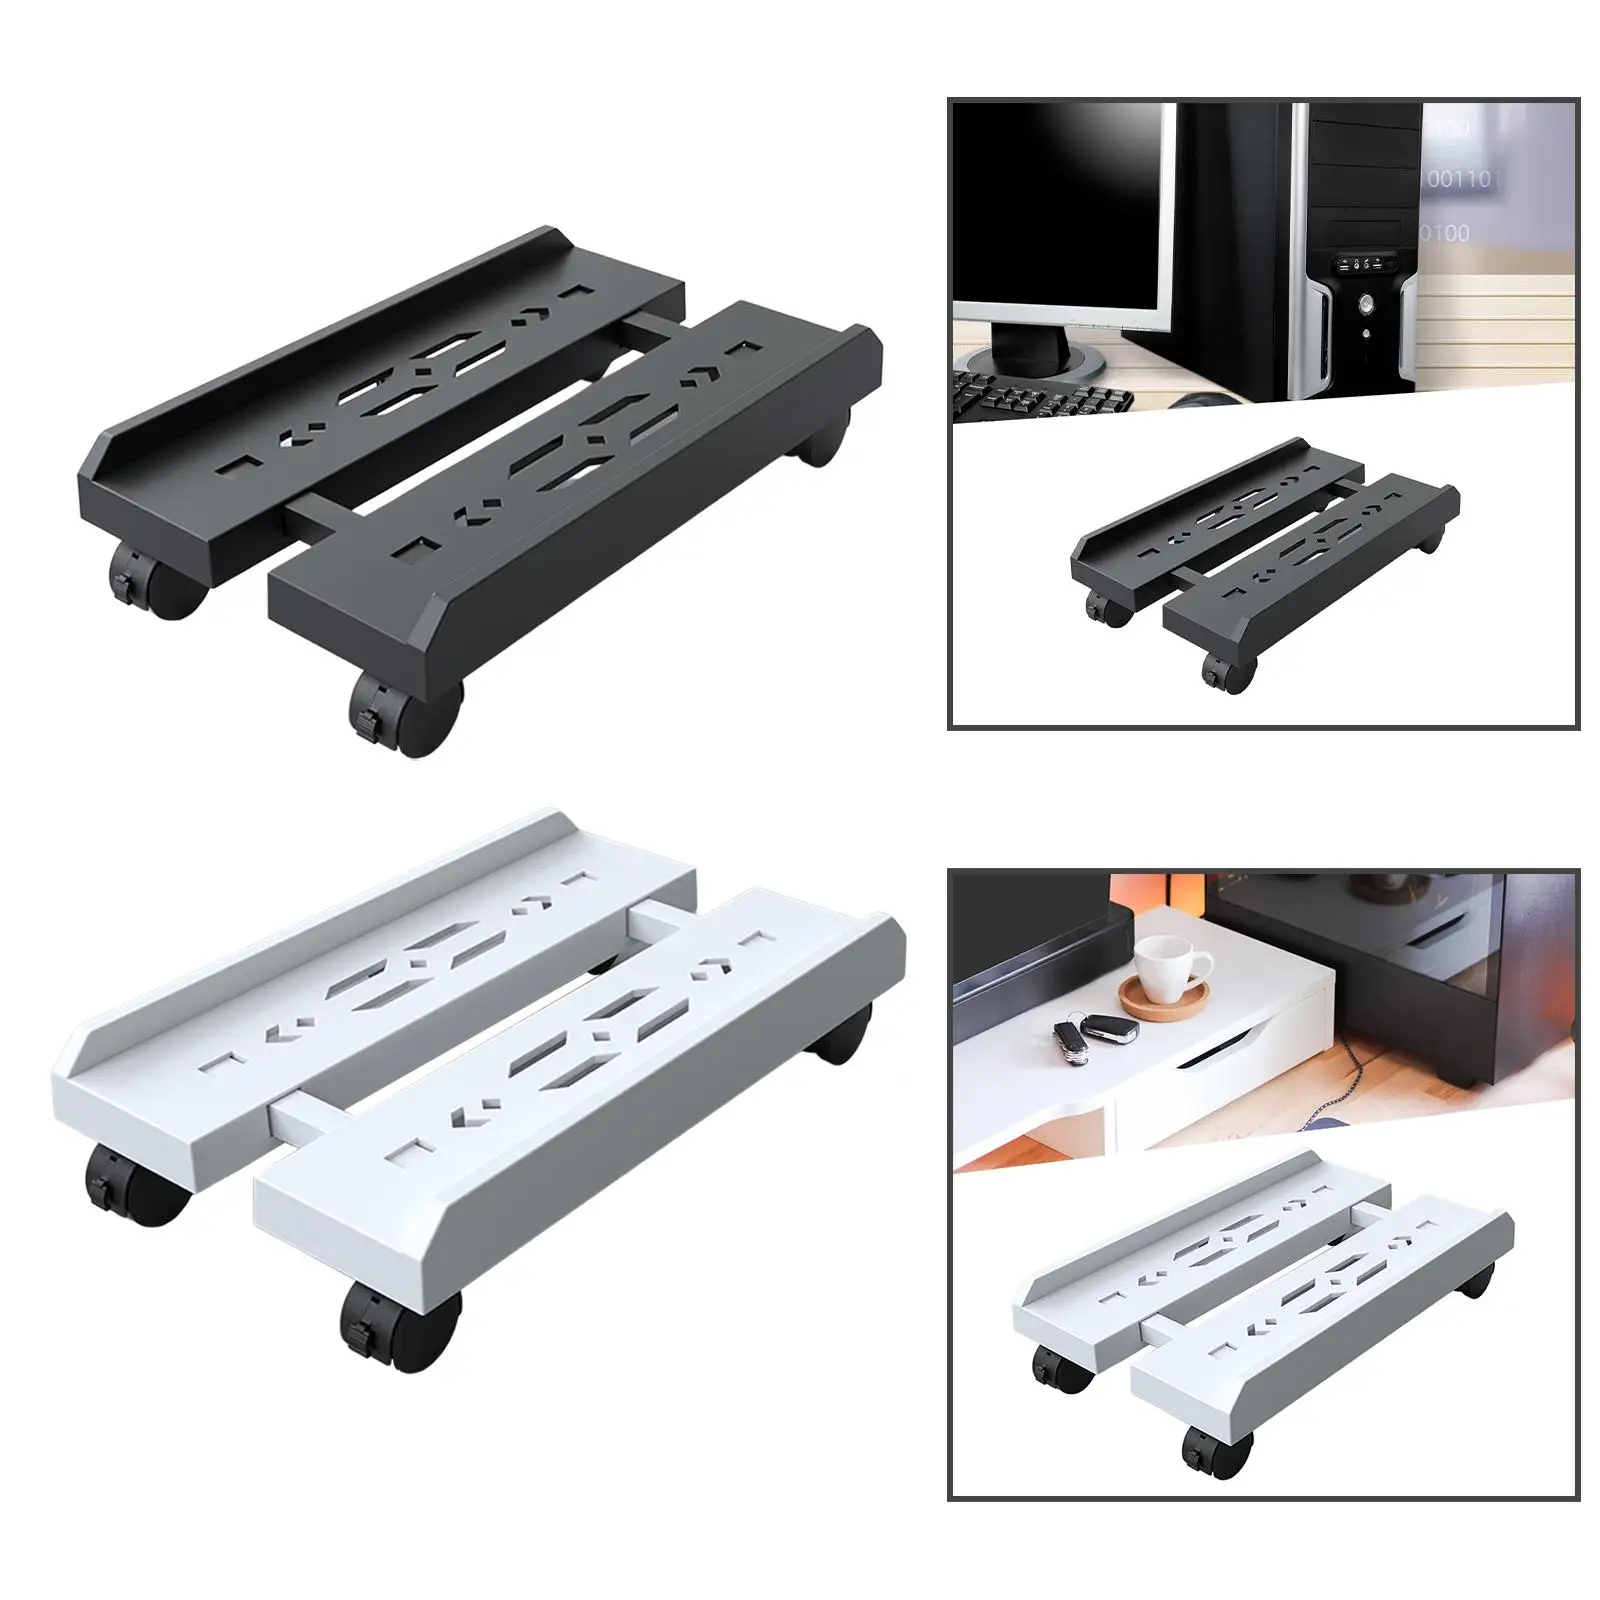 CPU Holder Stand Mobile CPU Stand PC Tower Stand PC Holder Cart Mobile Computer Tower Stand for Gaming PC under Desk Home Office